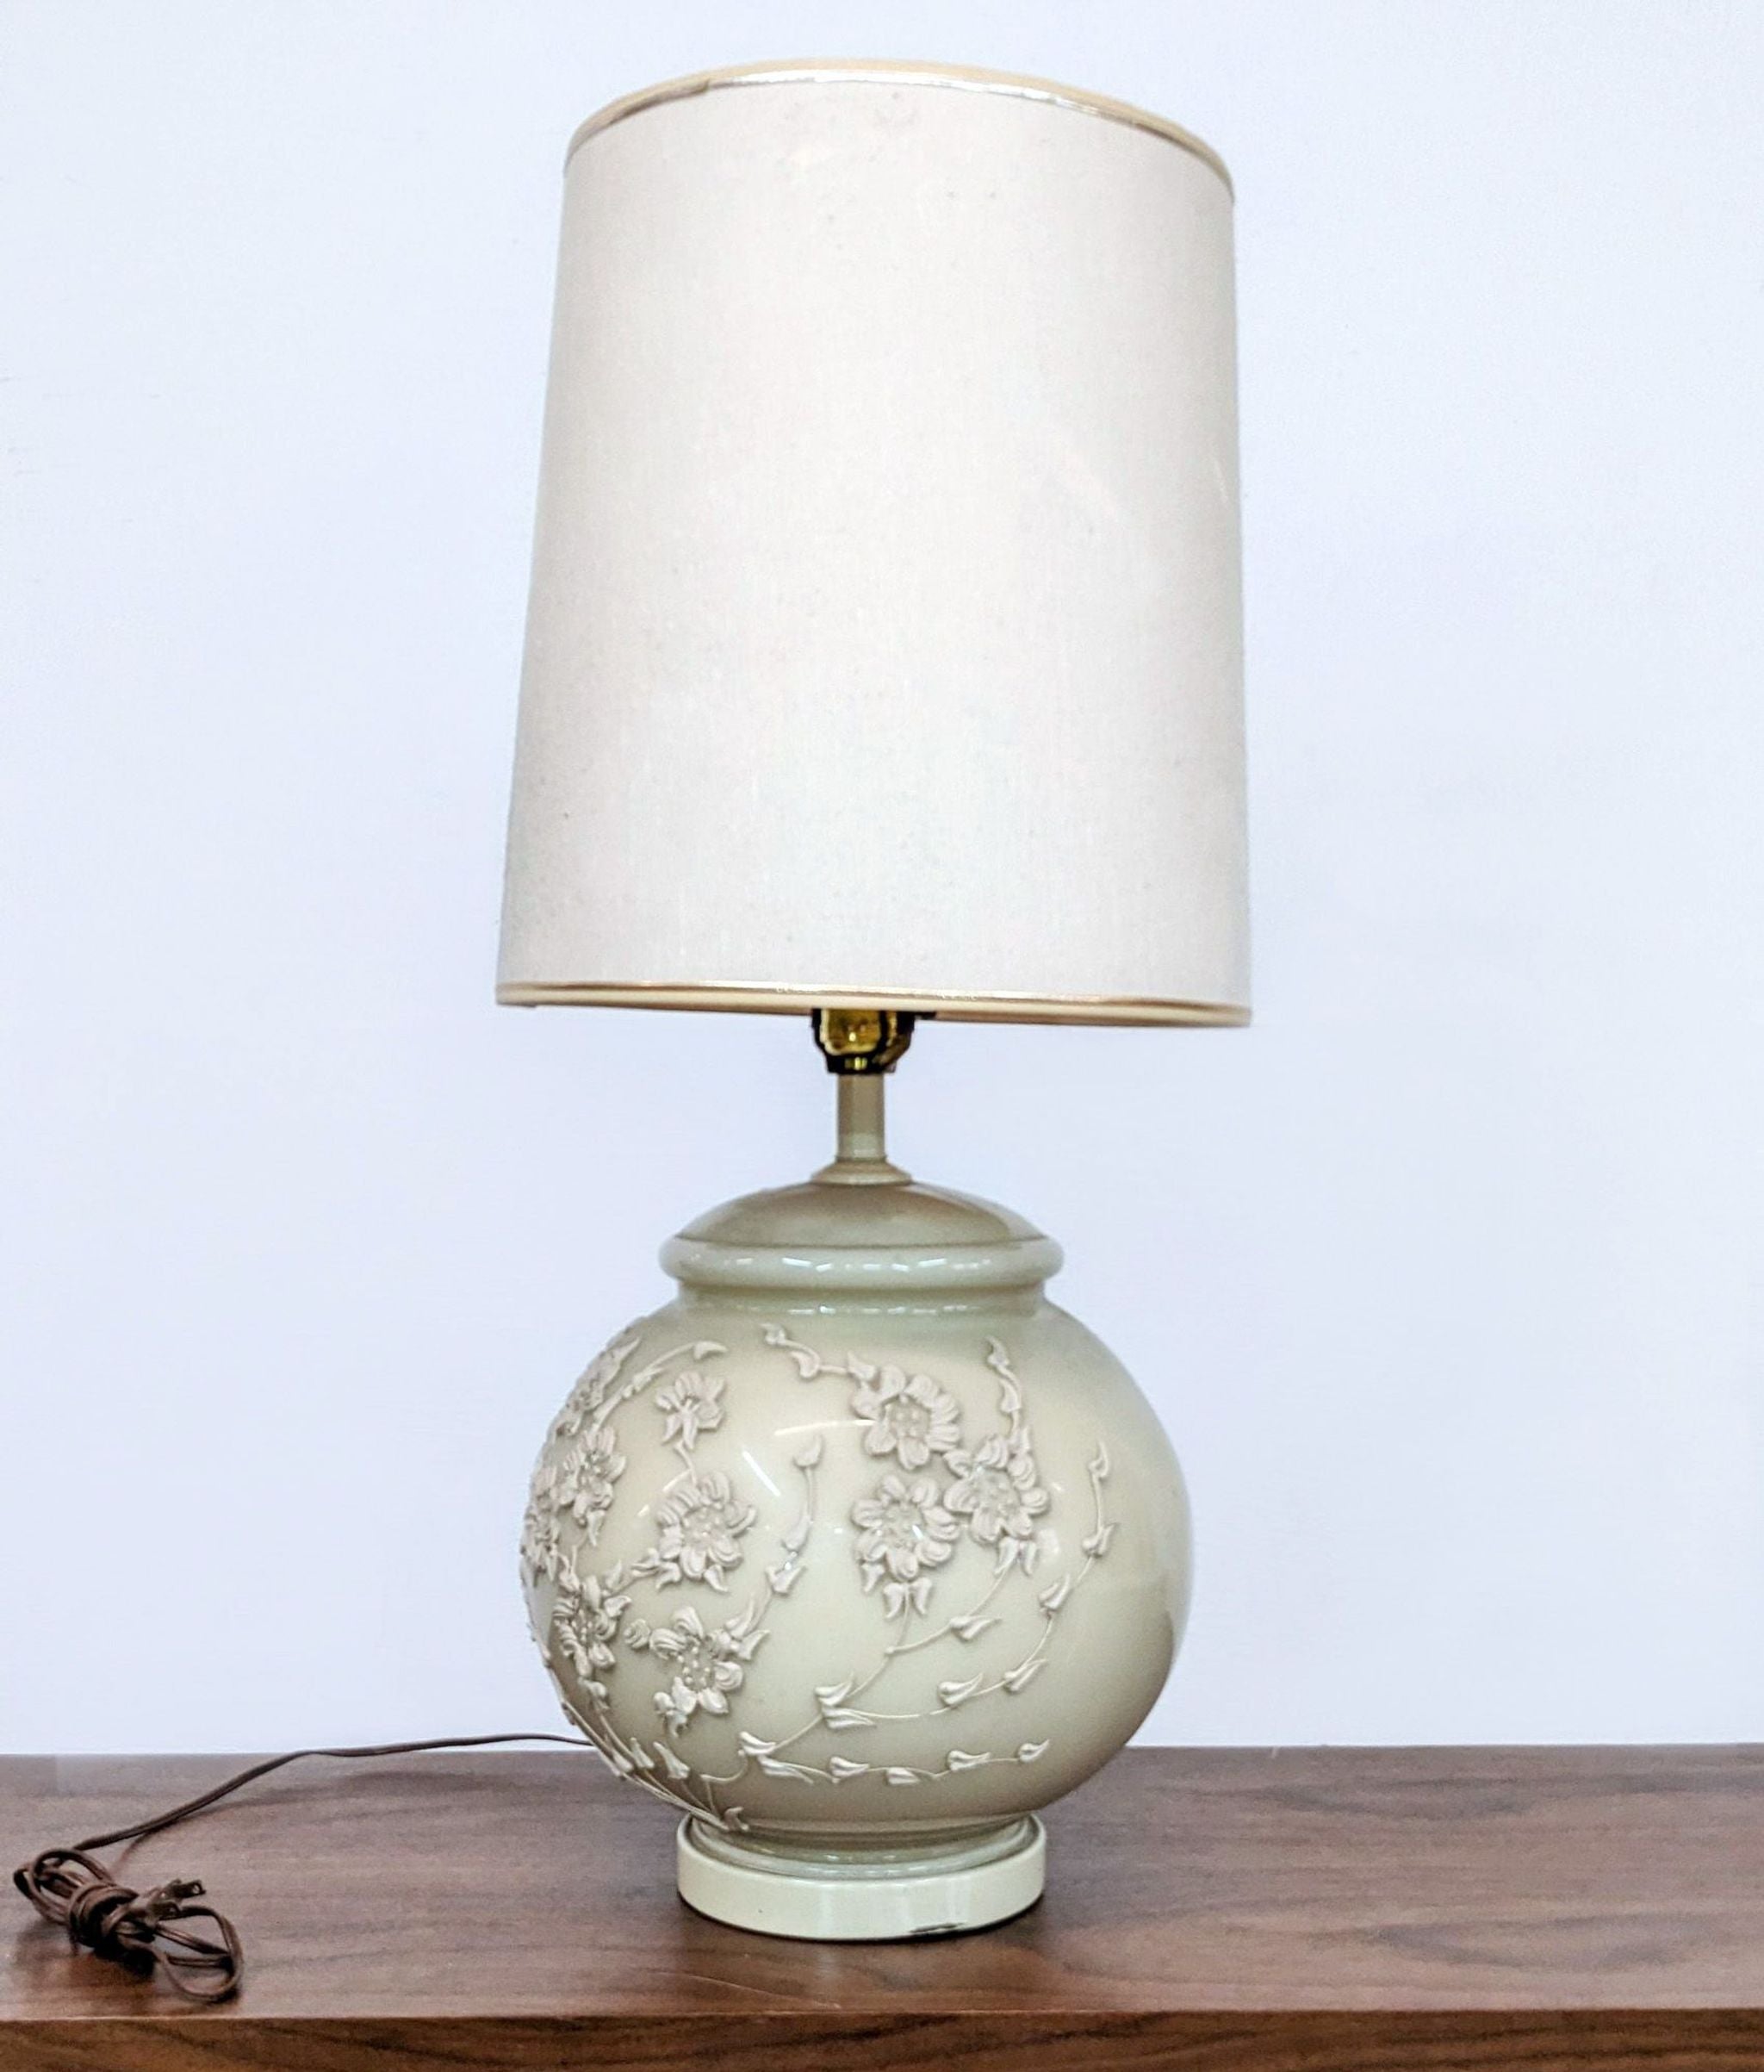 Alt text 1: Reperch brand table lamp with a cream-colored floral embossed base and a matching shade, on a wooden surface.